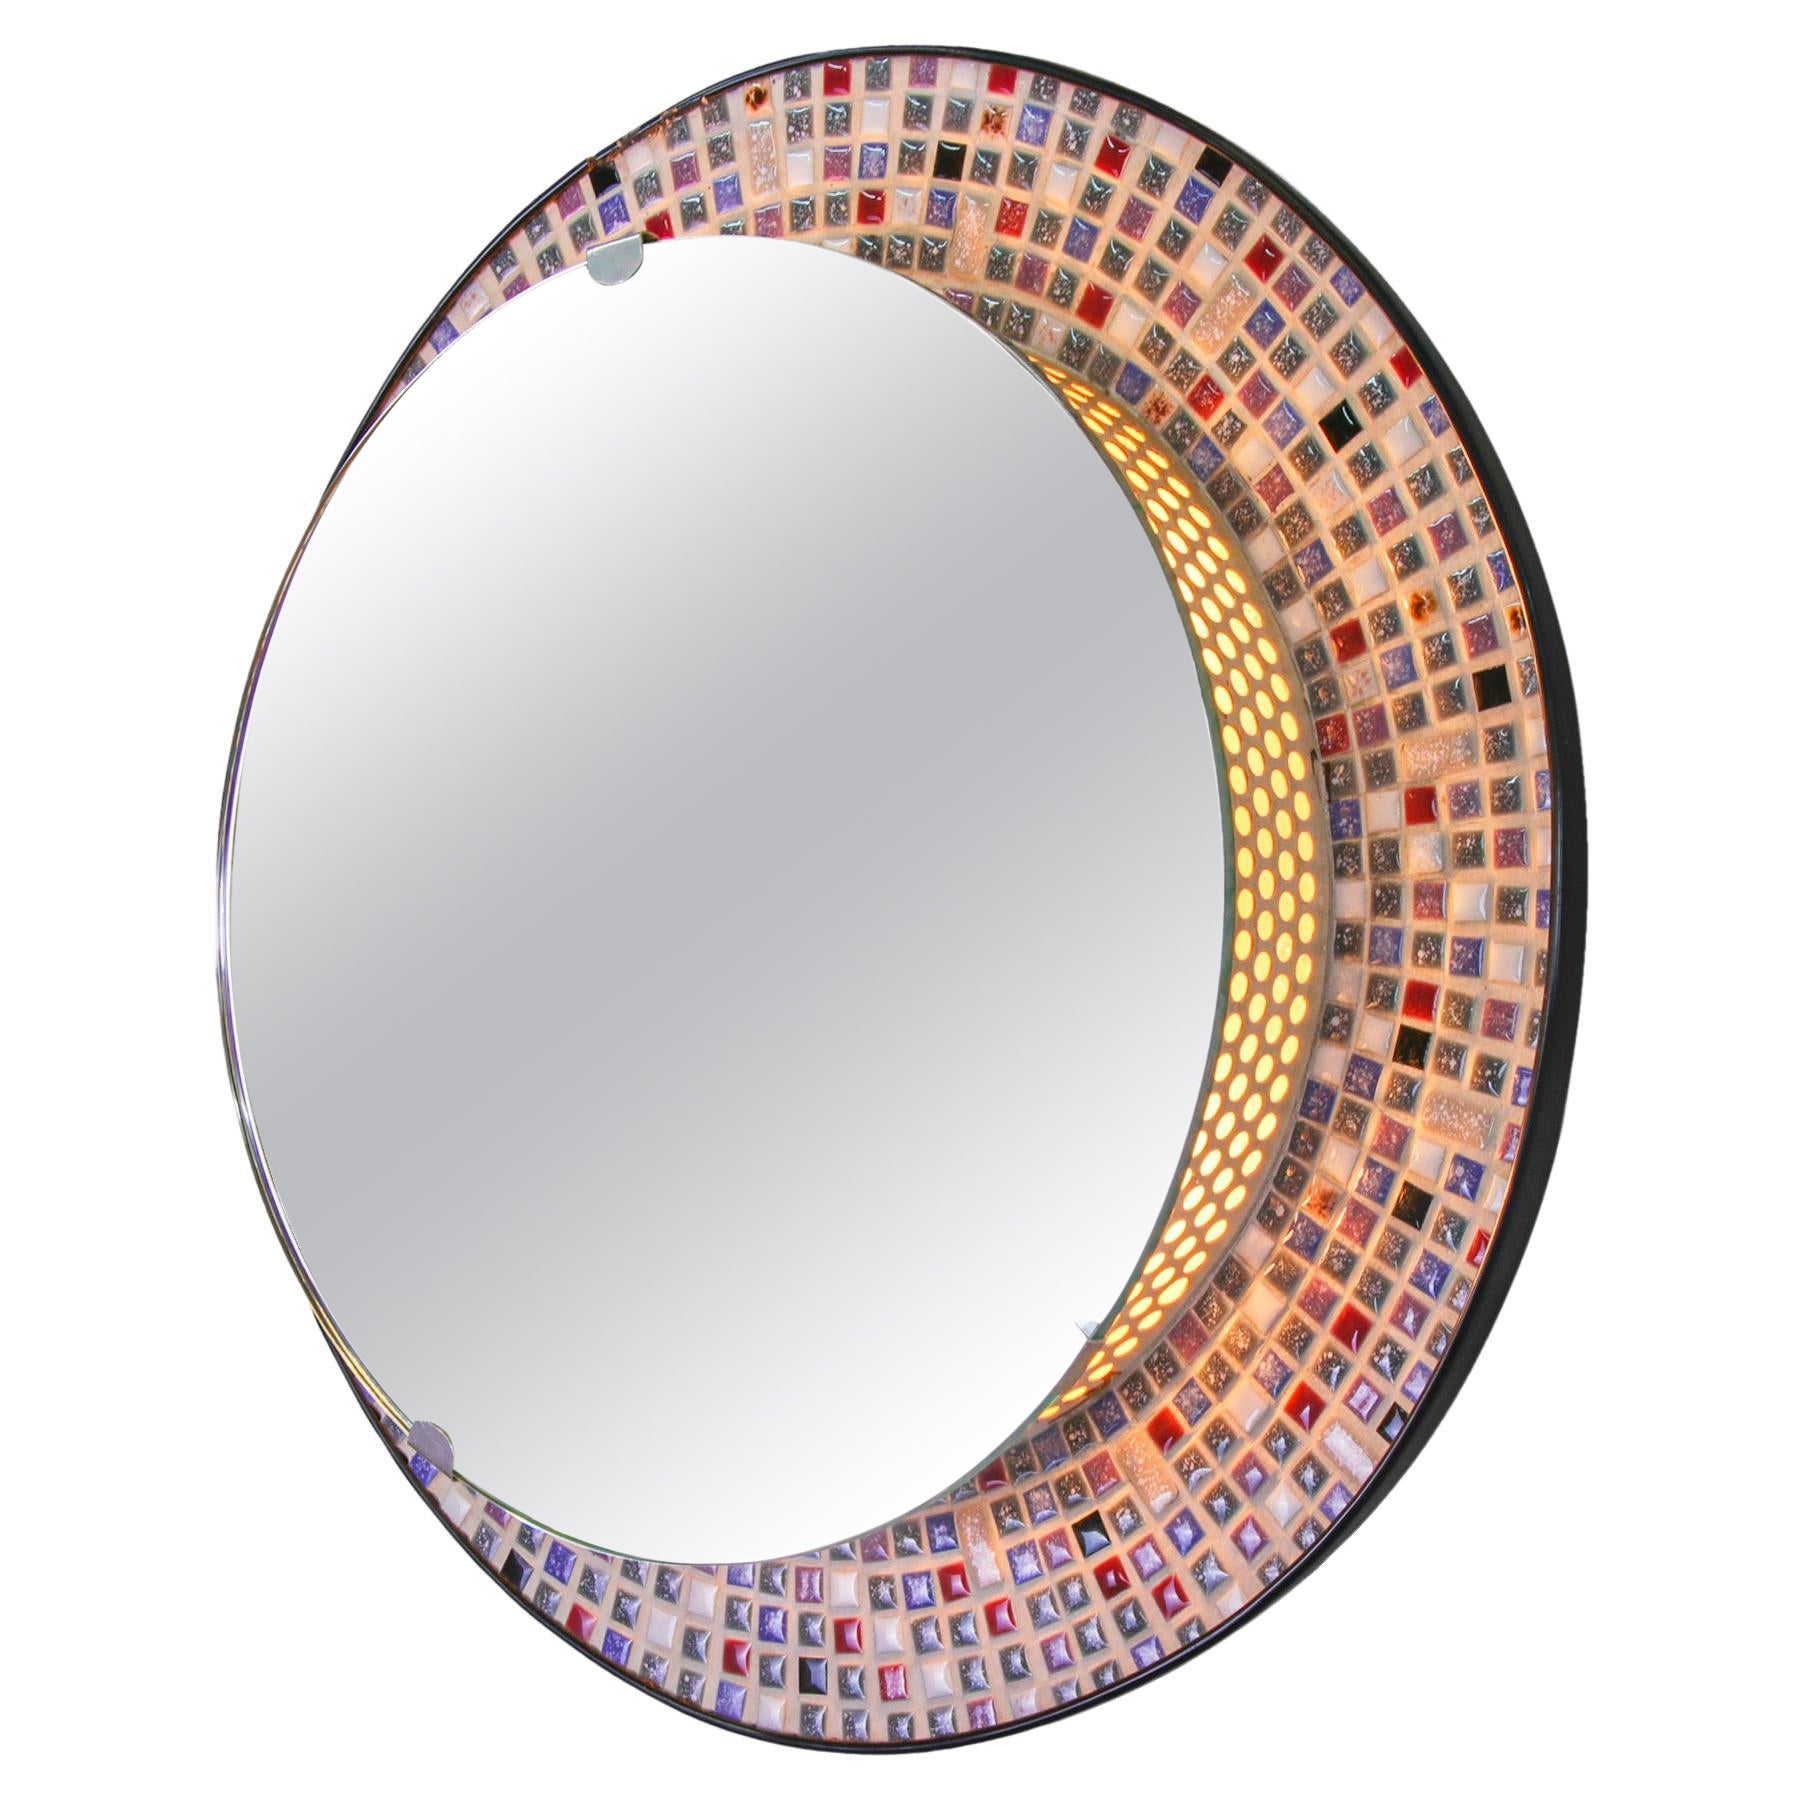 Circular Mosaic Backlit Mirror Glass and Perforated Metal, Germany 1950s For Sale